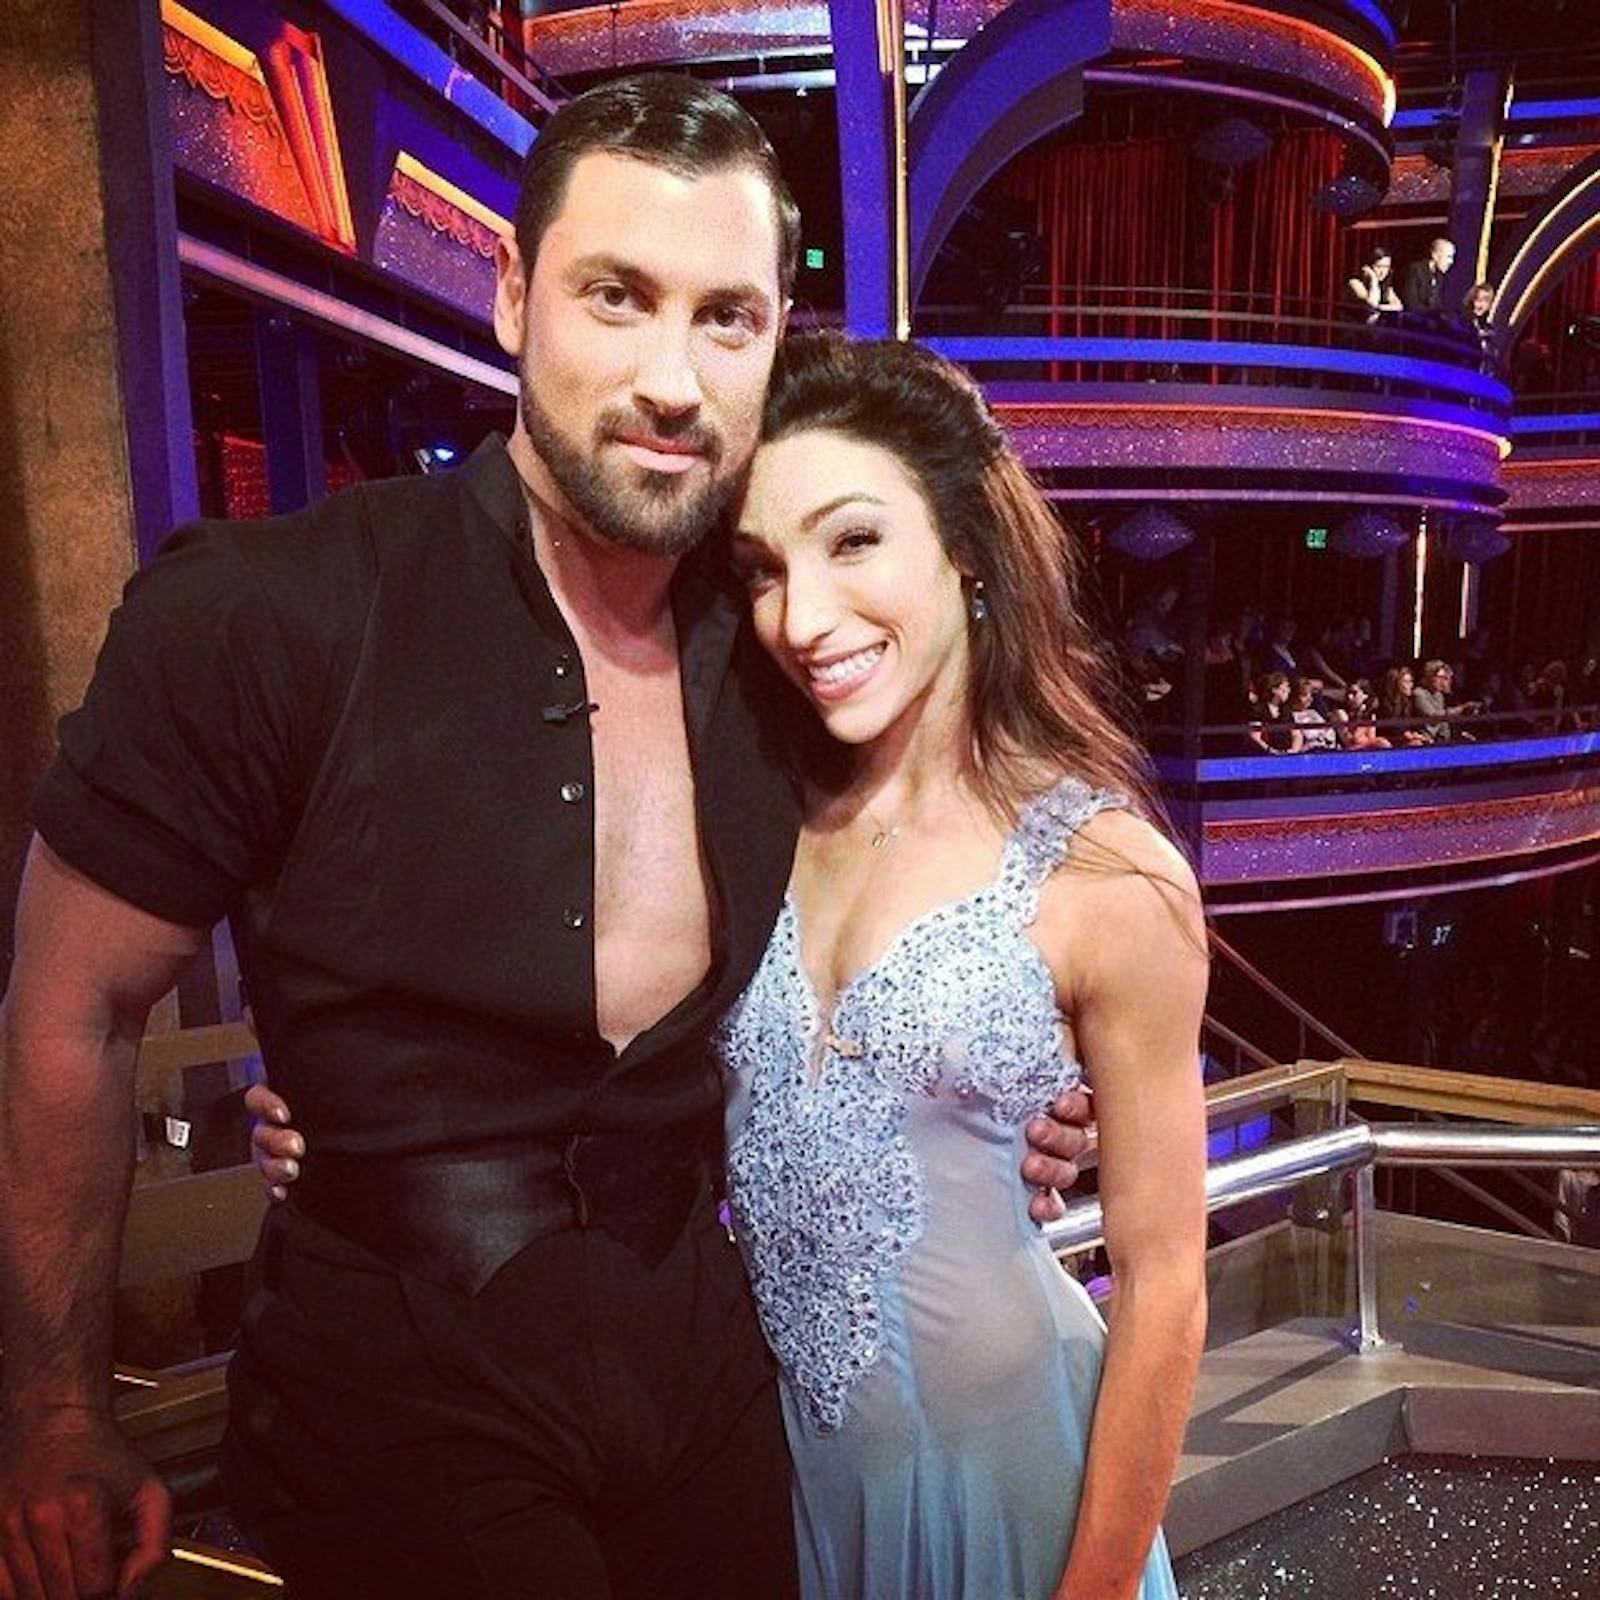 Why Meryl Davis And Maksim Chmerkovskiy Will Definitely Date After Dancing With The Stars